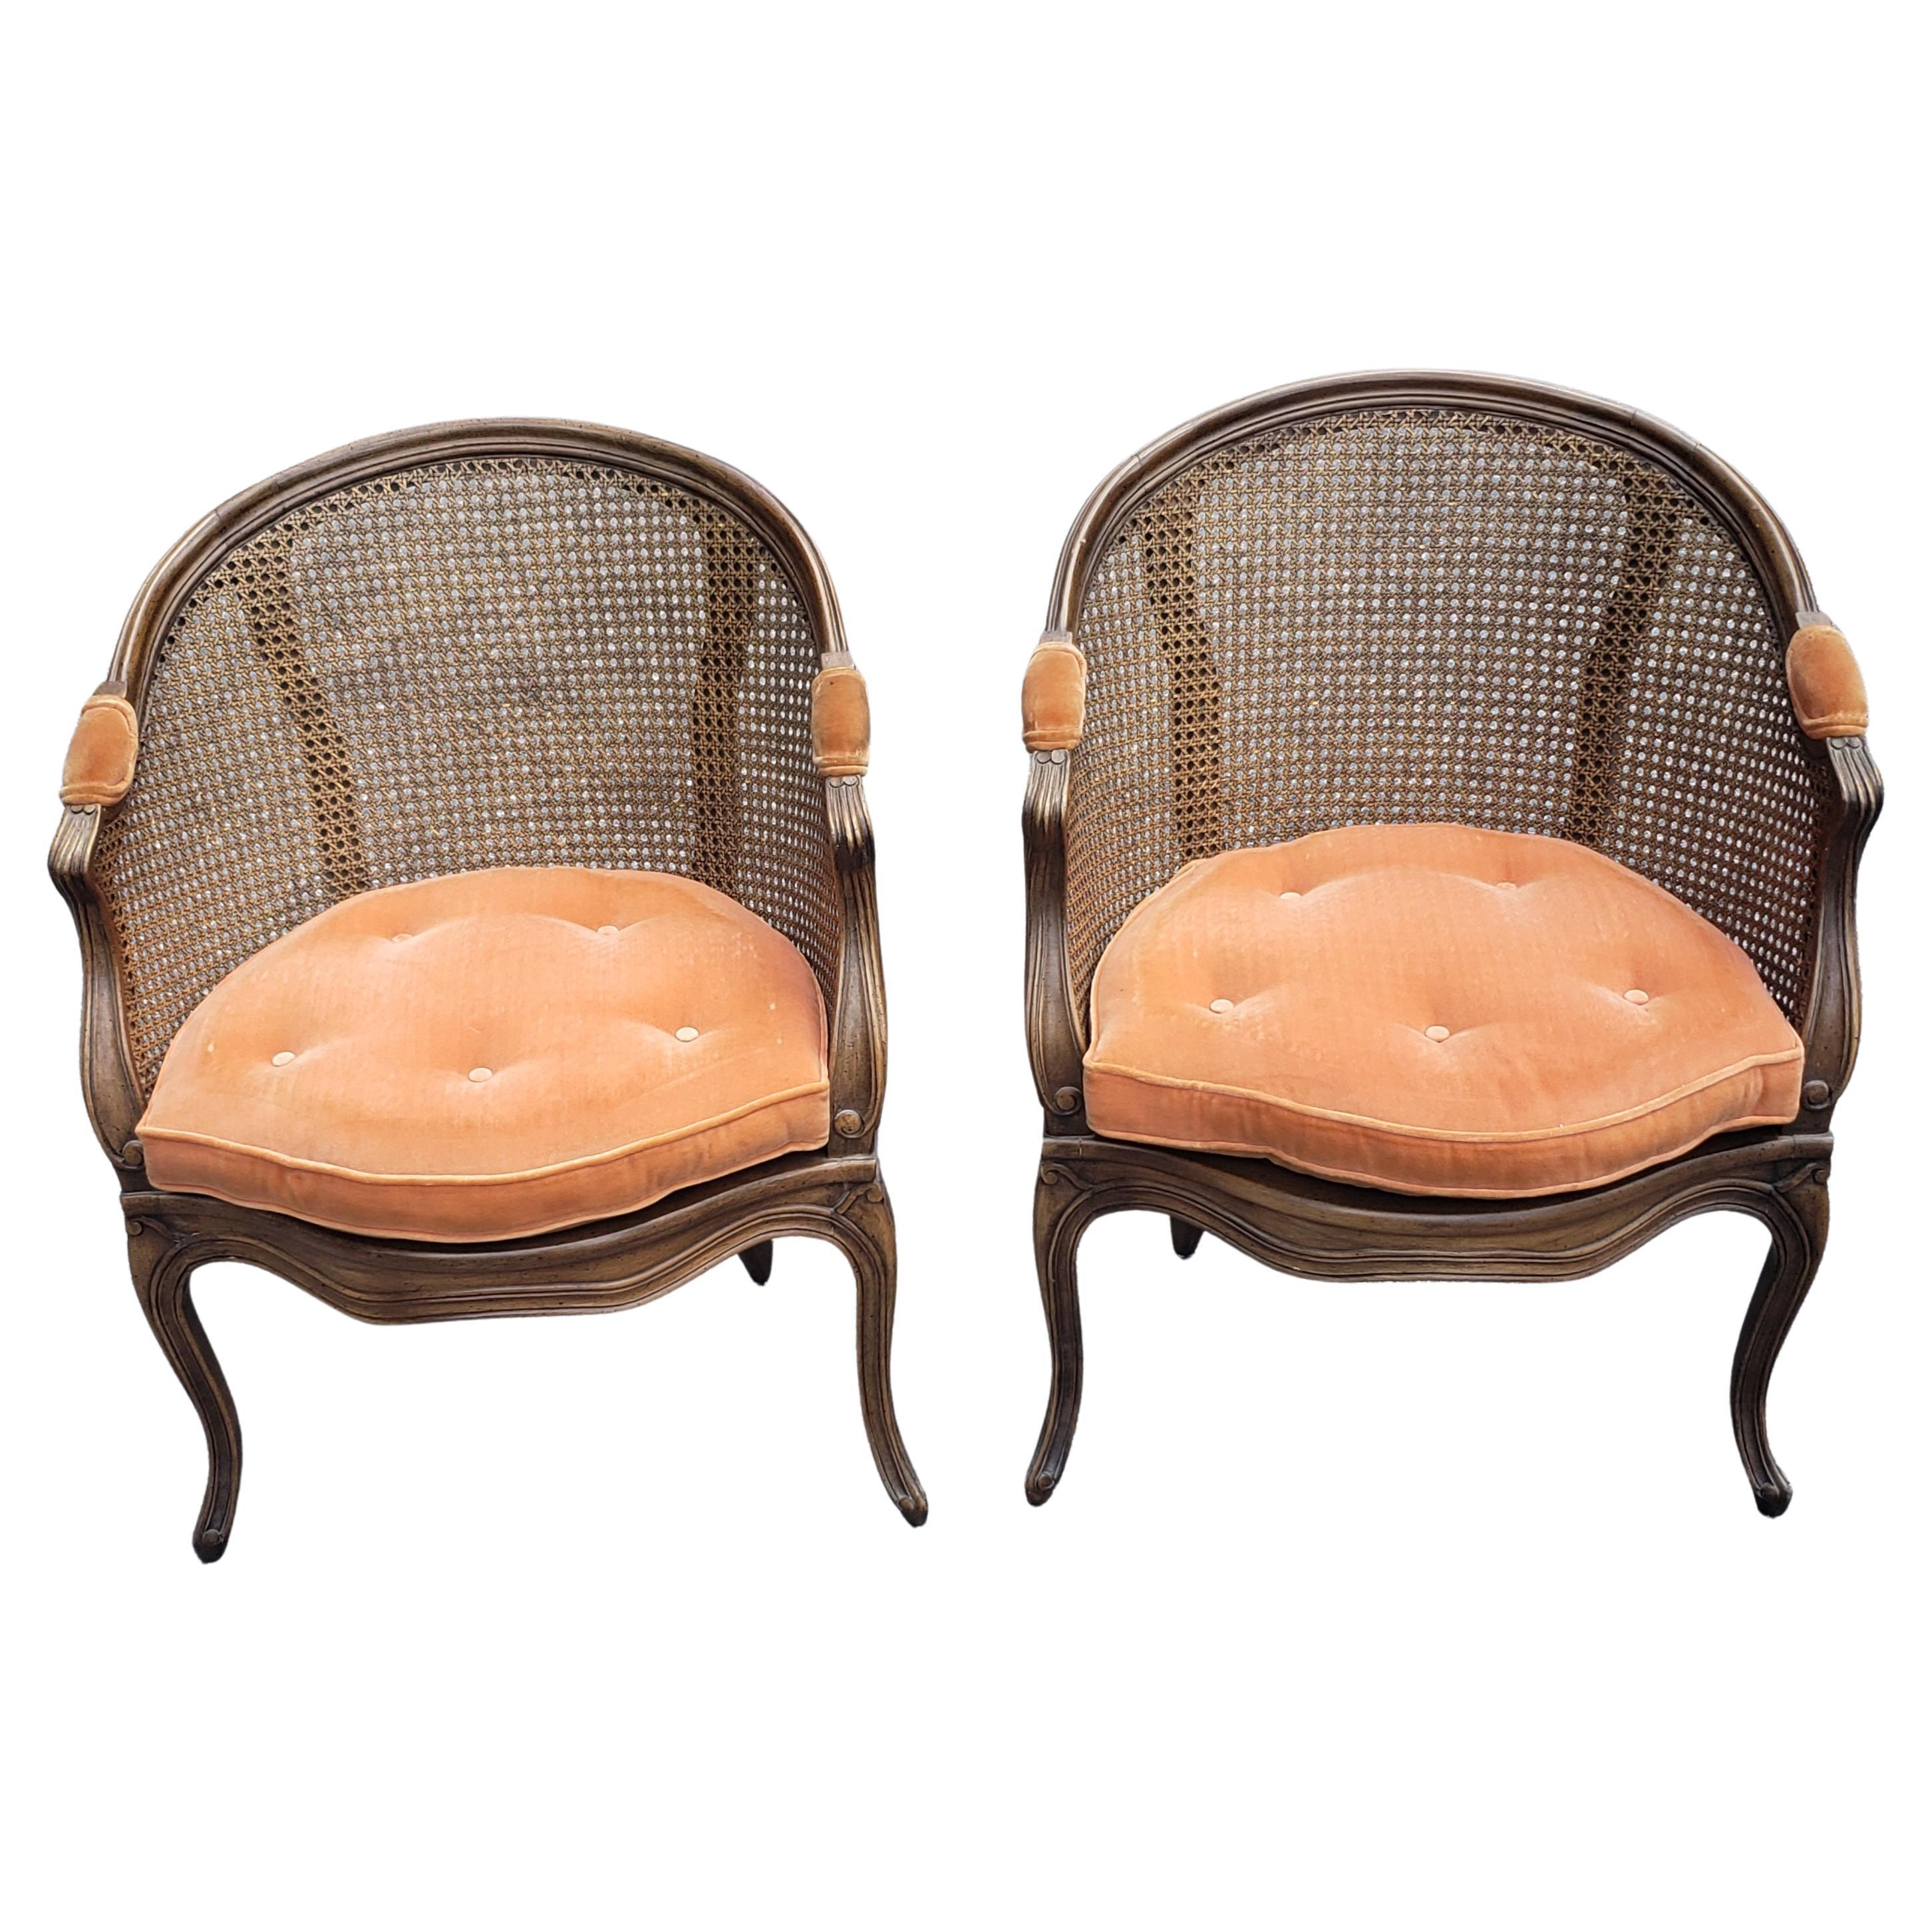 Pair of French provincial/Country walnut and cane chairs in very good vintage condition. Double sided removable tufted seat cushion. Color peach coralish color cushions. Measures 25